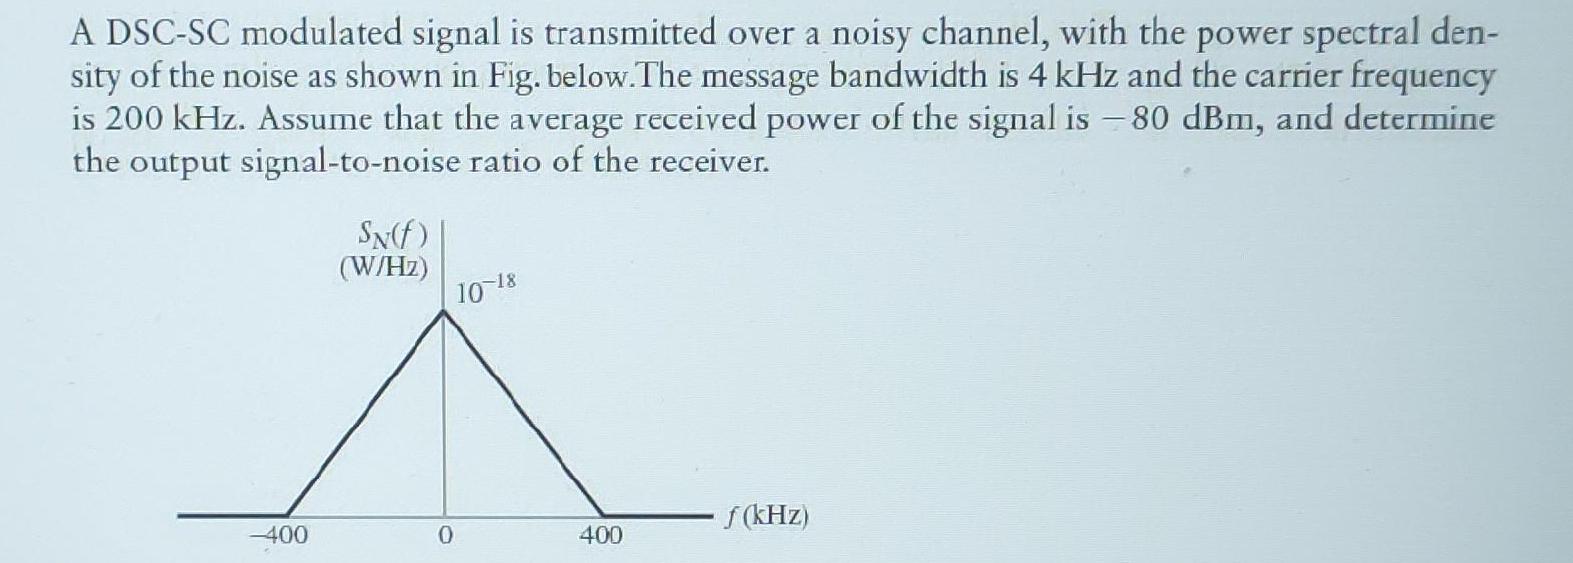 A DSC-SC modulated signal is transmitted over a noisy channel, with the power spectral den- sity of the noise